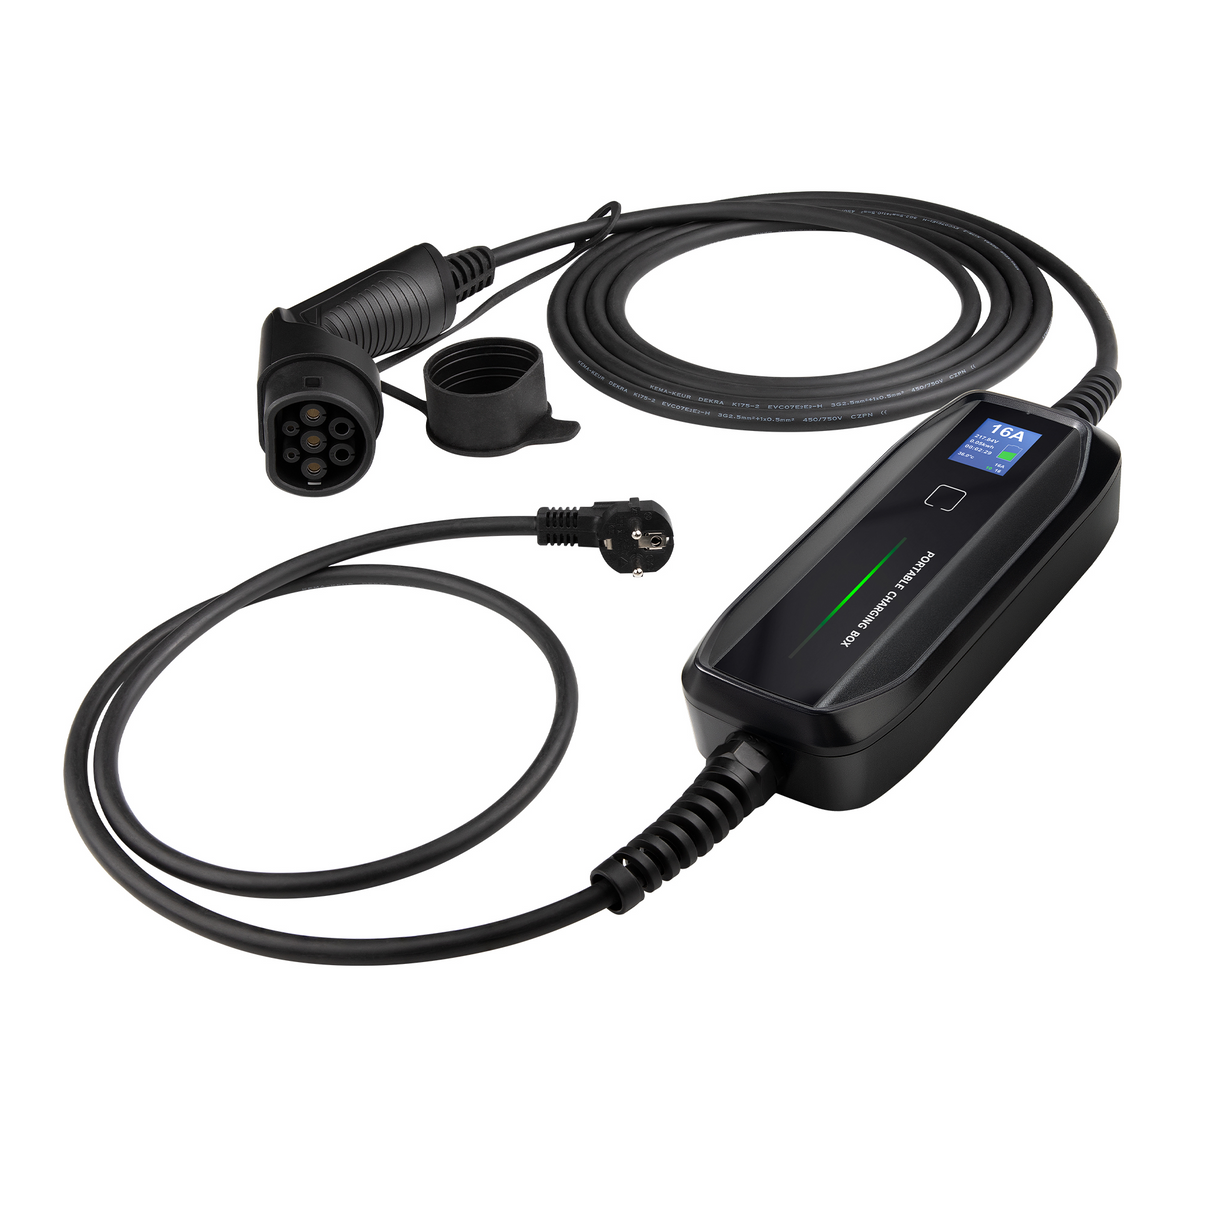 Crossback Mobile Charger DS 7 - Amis de LCD - Type 2 à Schuko